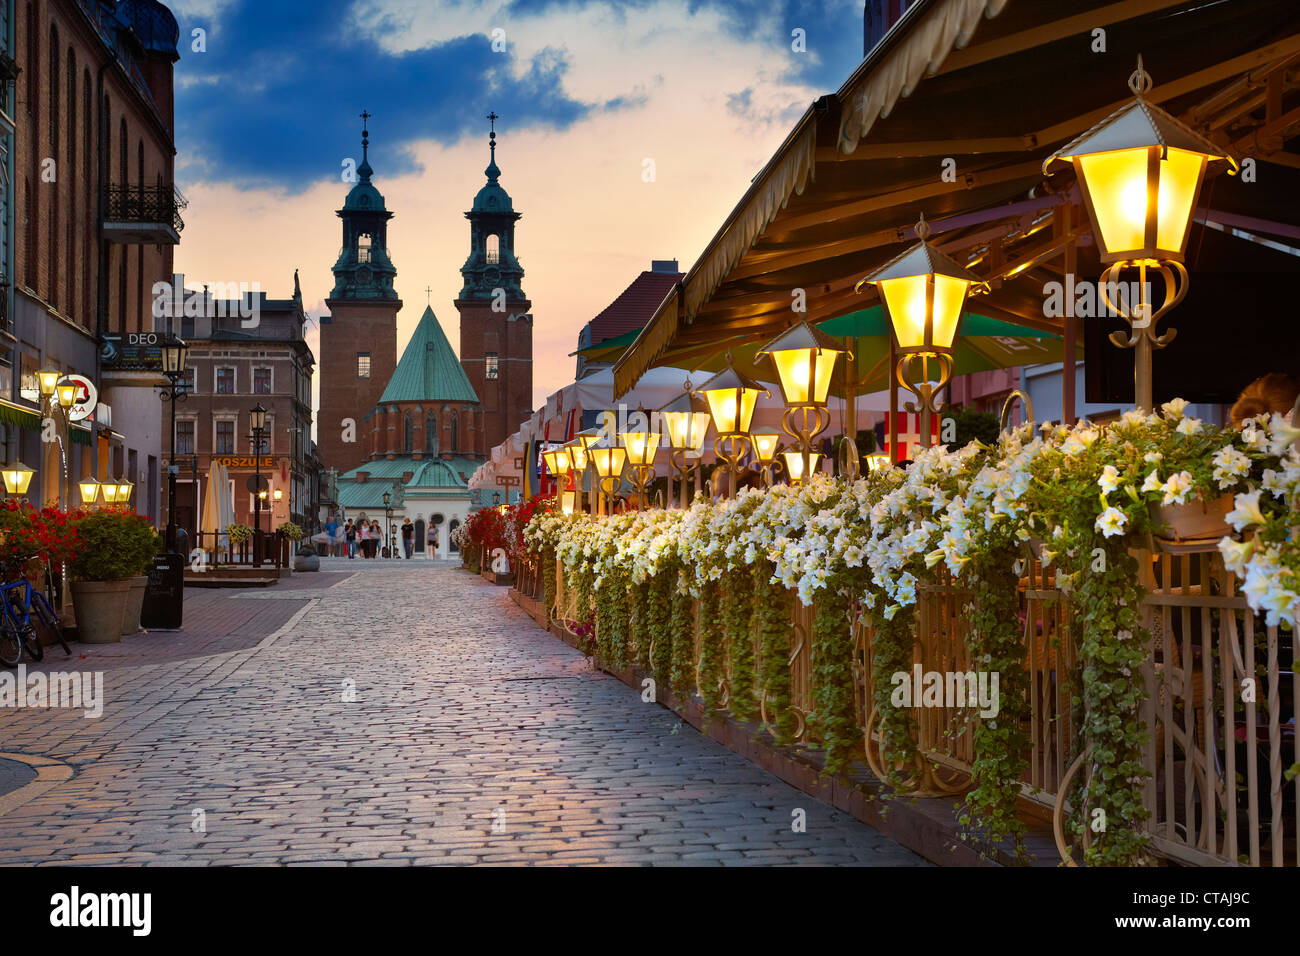 Gniezno - Old Town, Tumska street overlooking the Cathedral, Poland Stock Photo